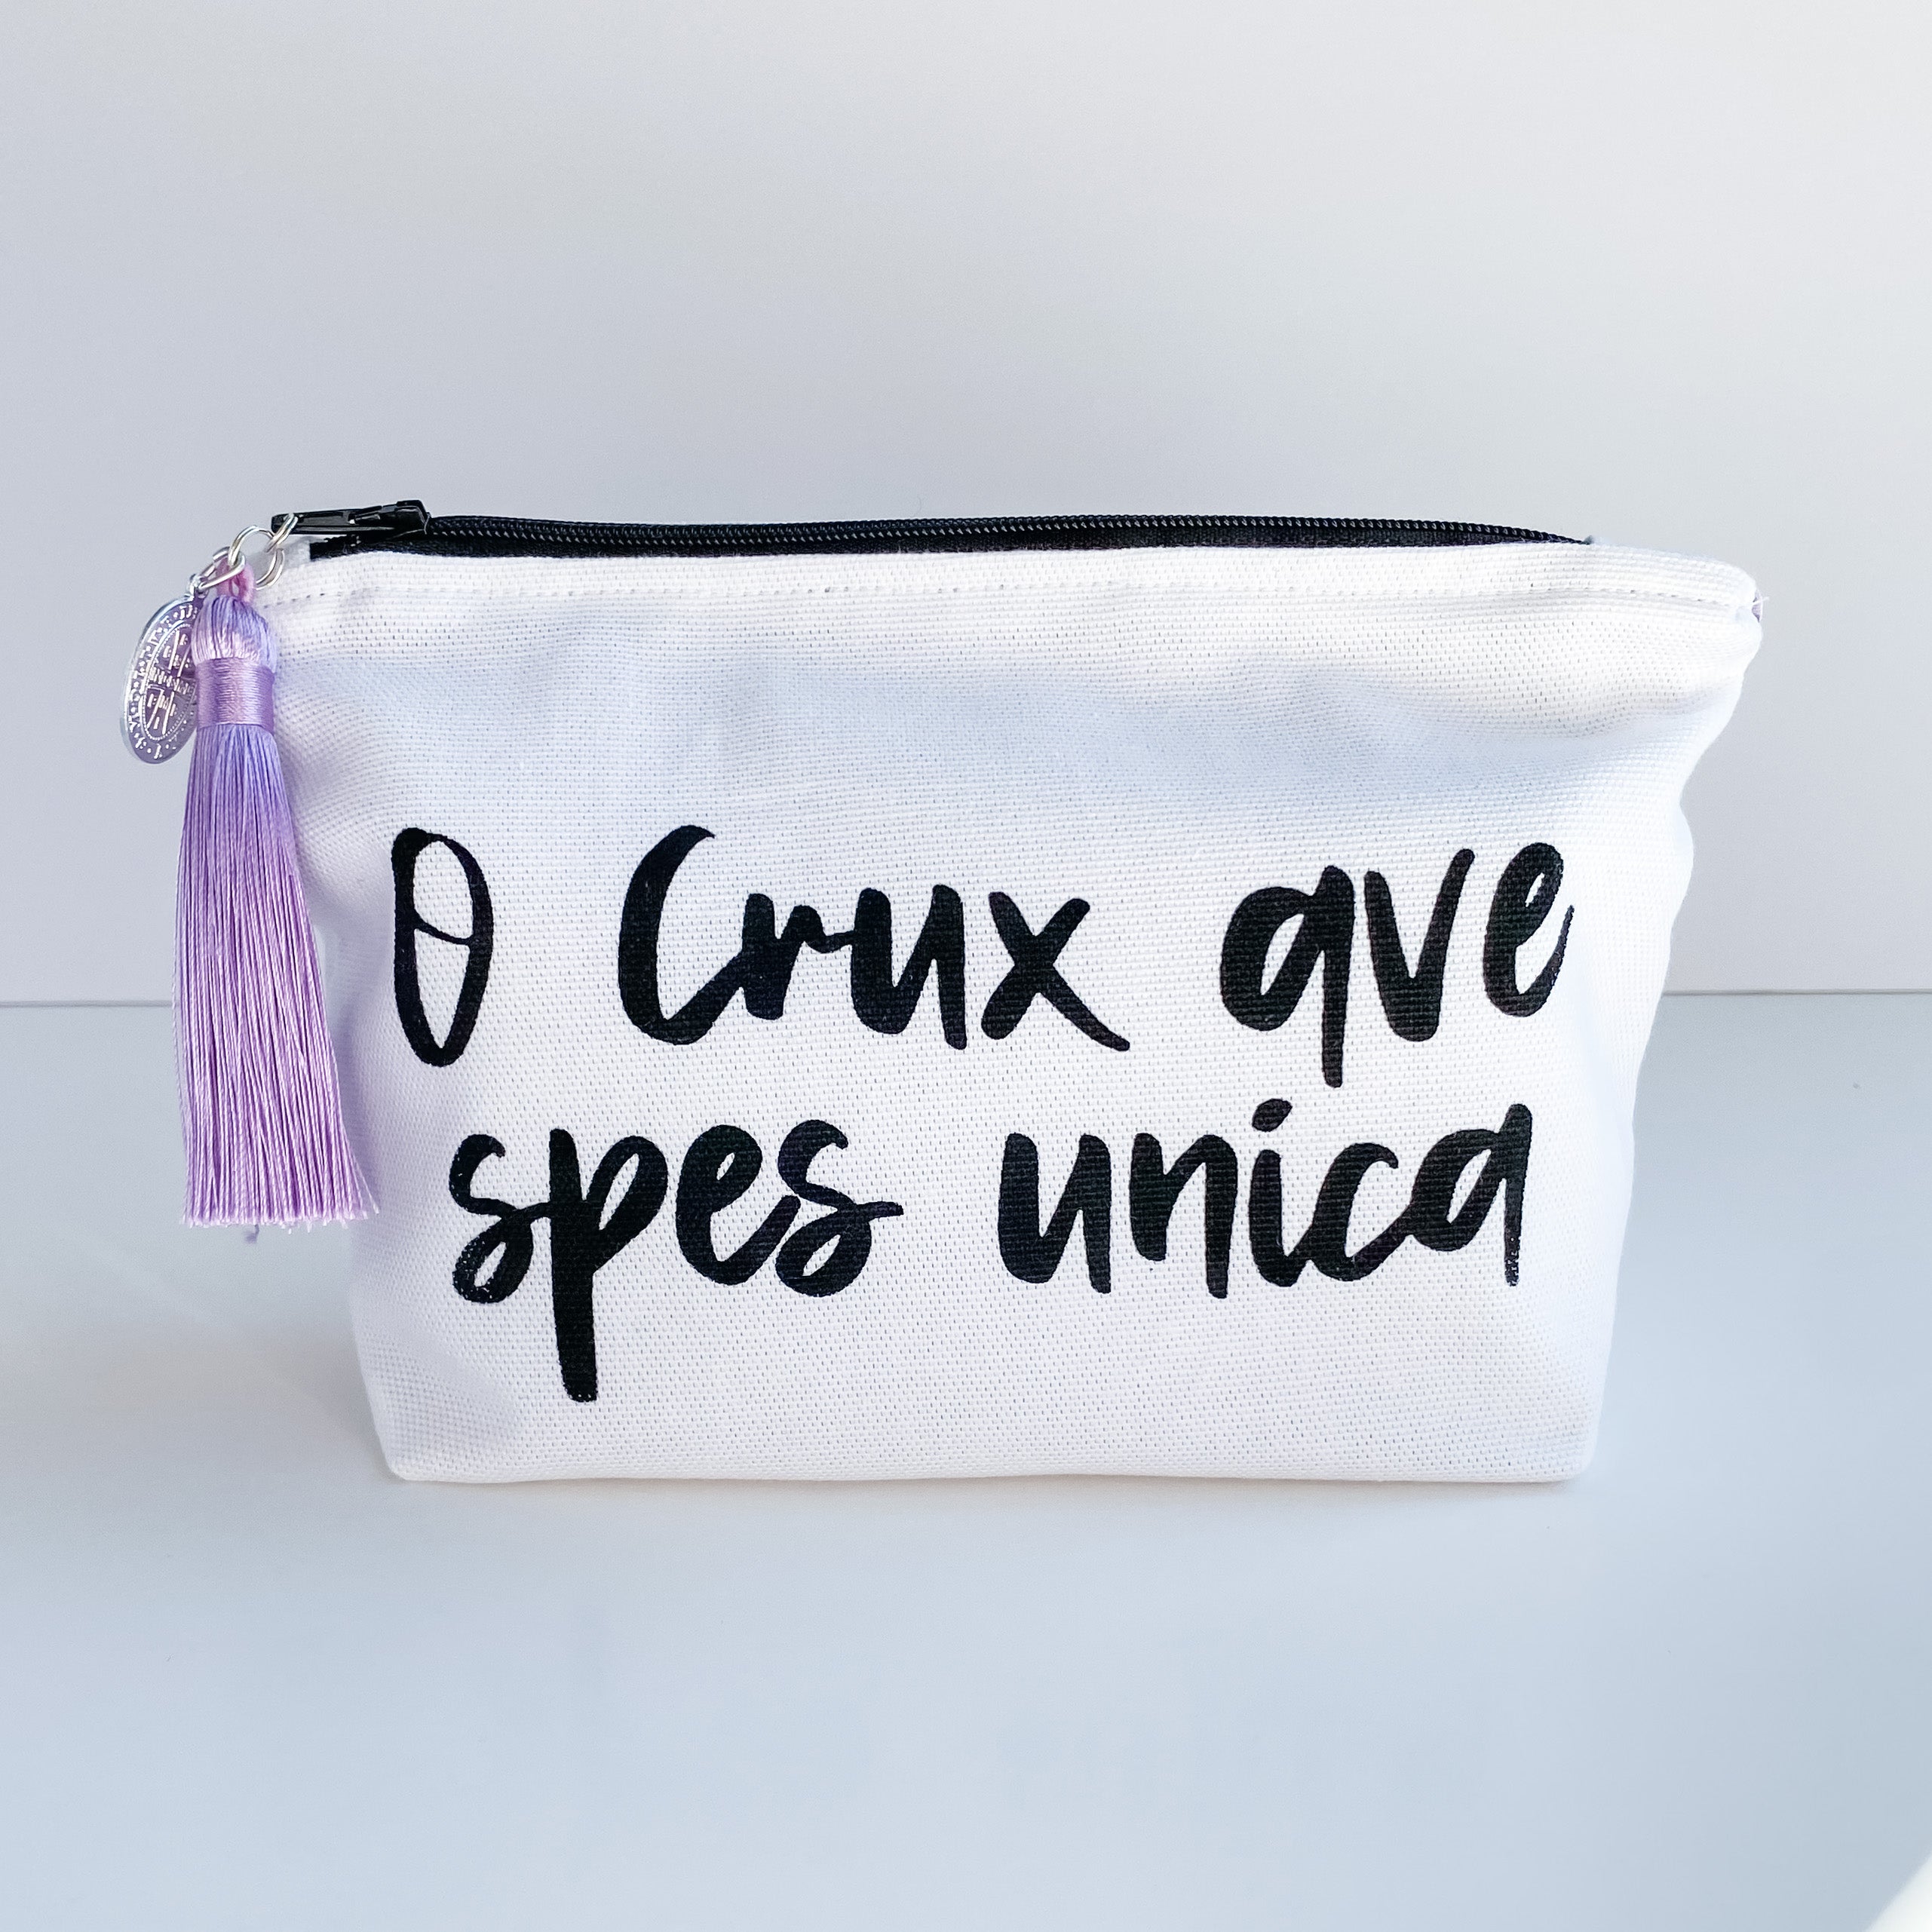 Tribulation Kit with "O Crux Ave" Zipper Pouch – DISCONTINUED